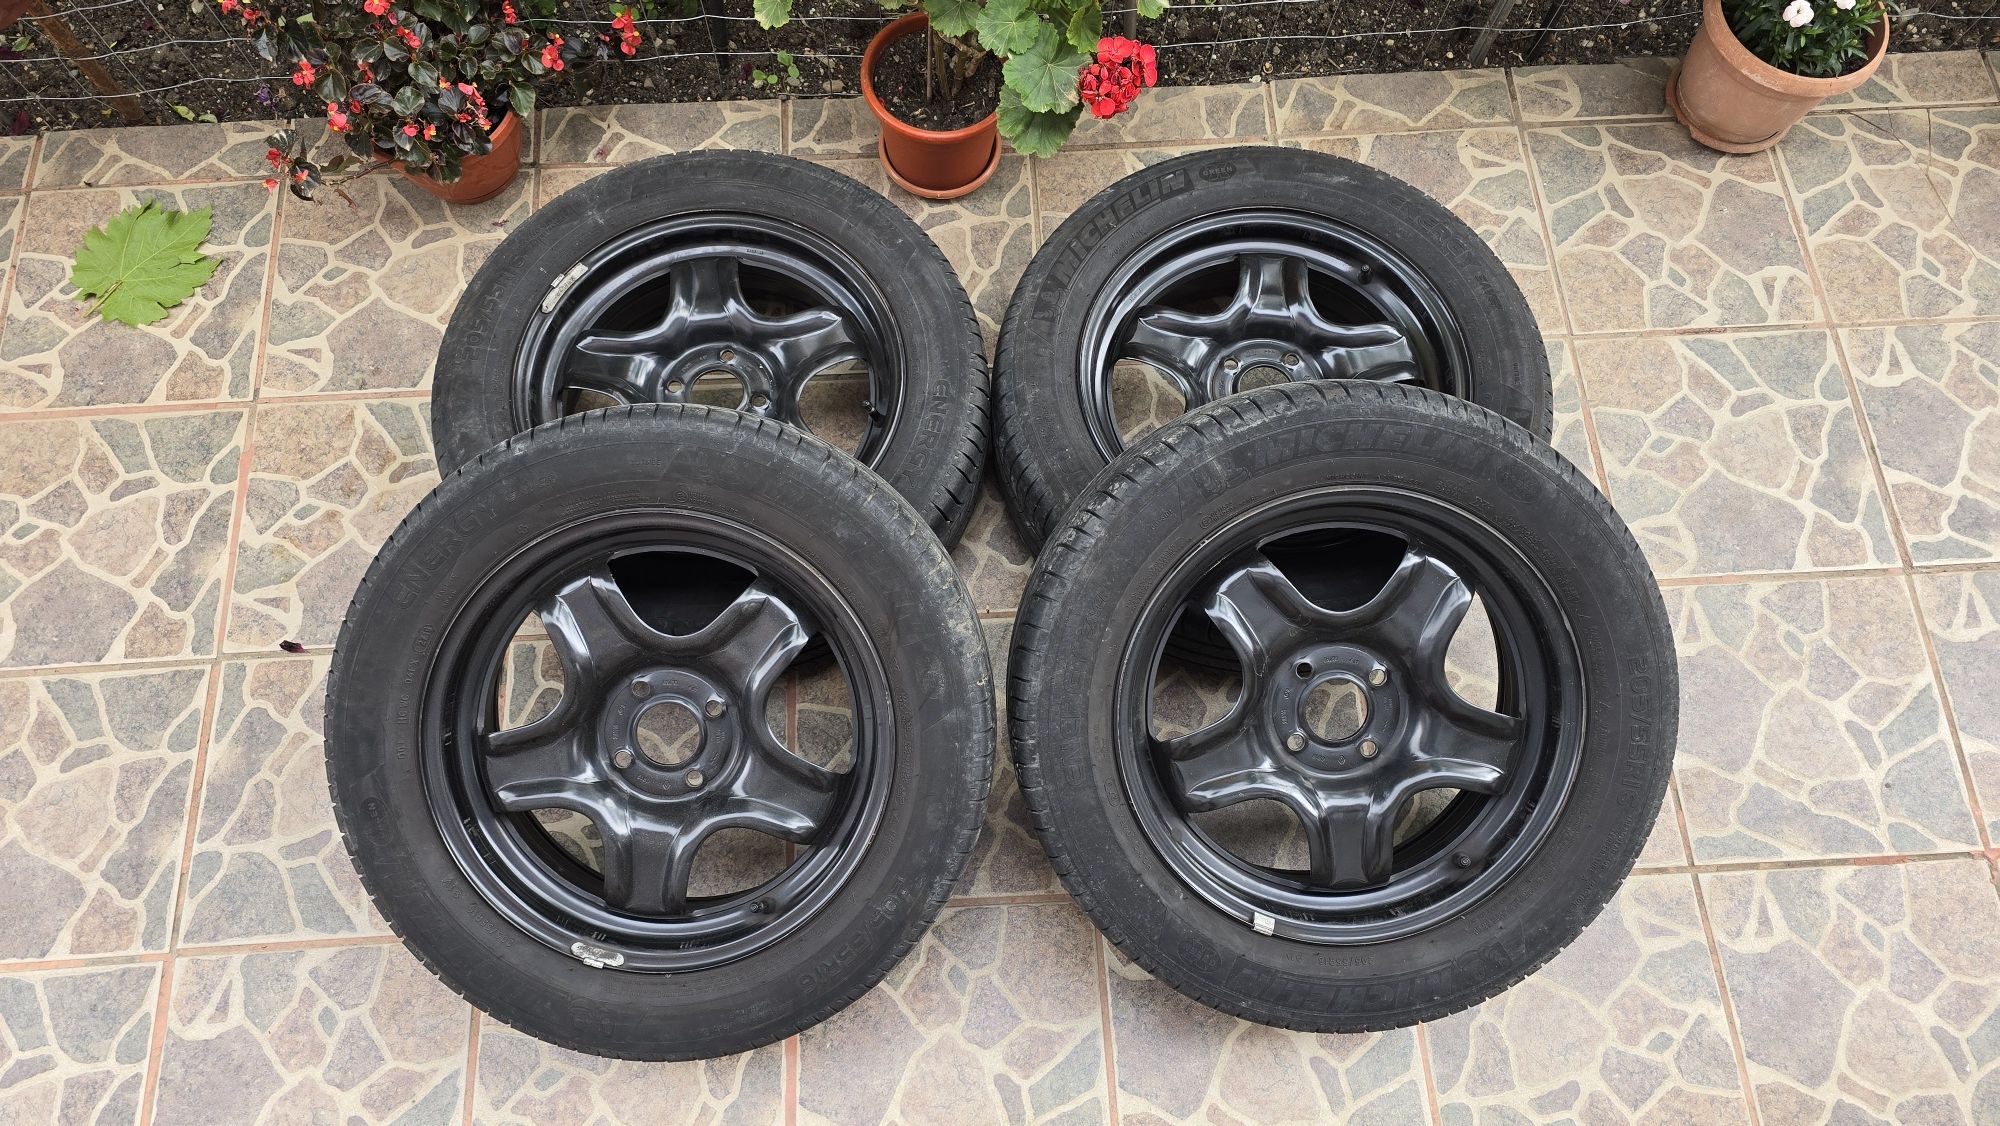 Jante structurate 4x100 Logan anvelope 205 55 r16 Dacia lodgy clio